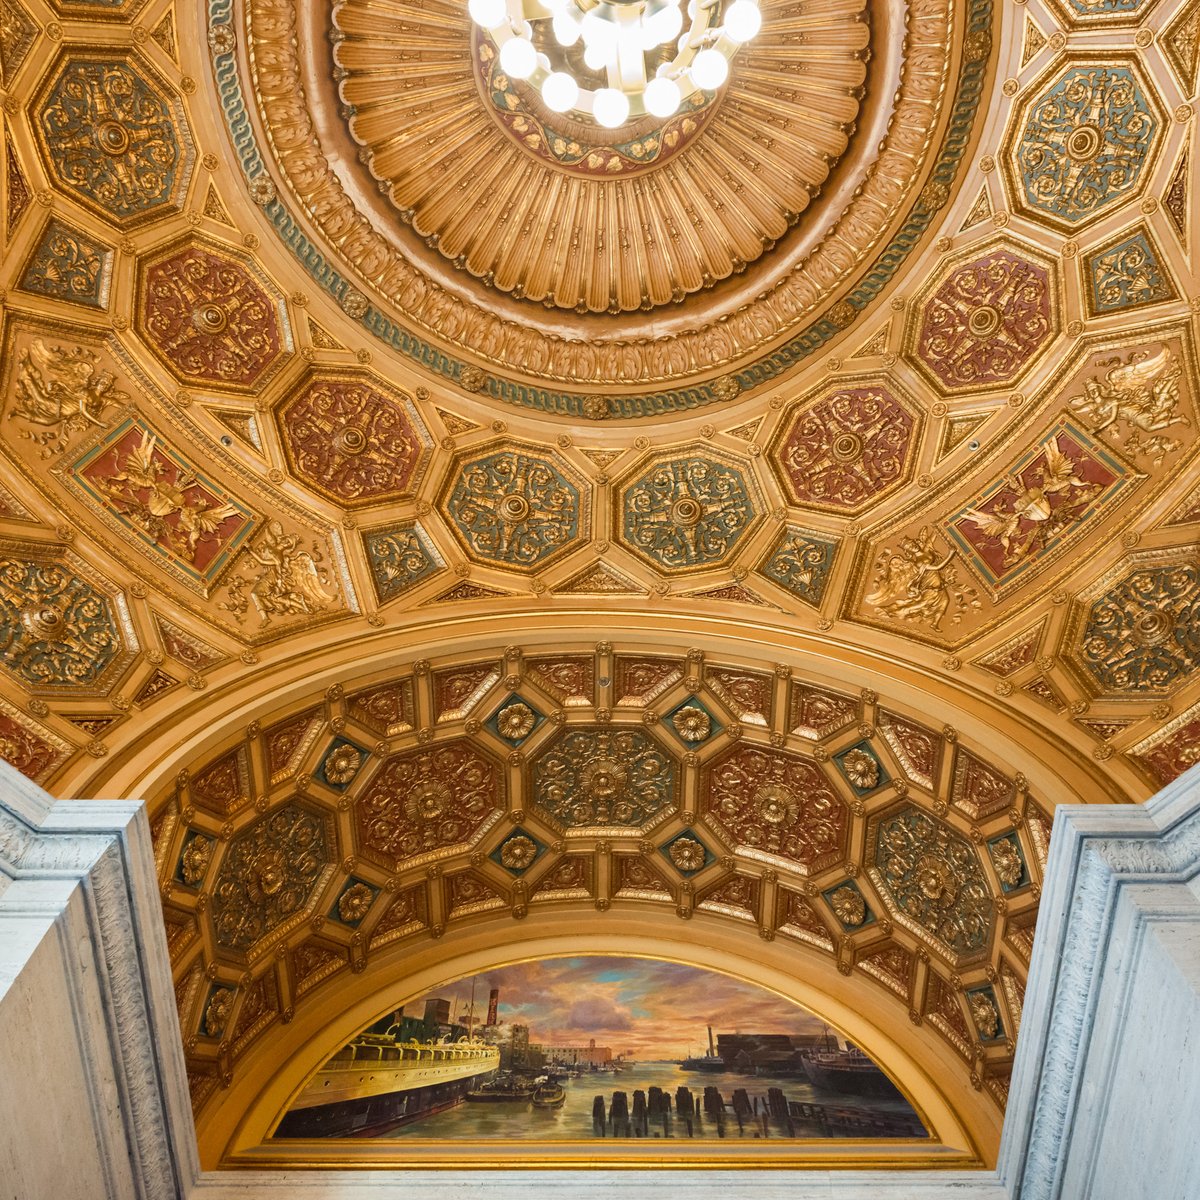 When you visit, make sure you take a moment to appreciate the ceiling detail in the rotunda on the first floor. #ItStartsHere